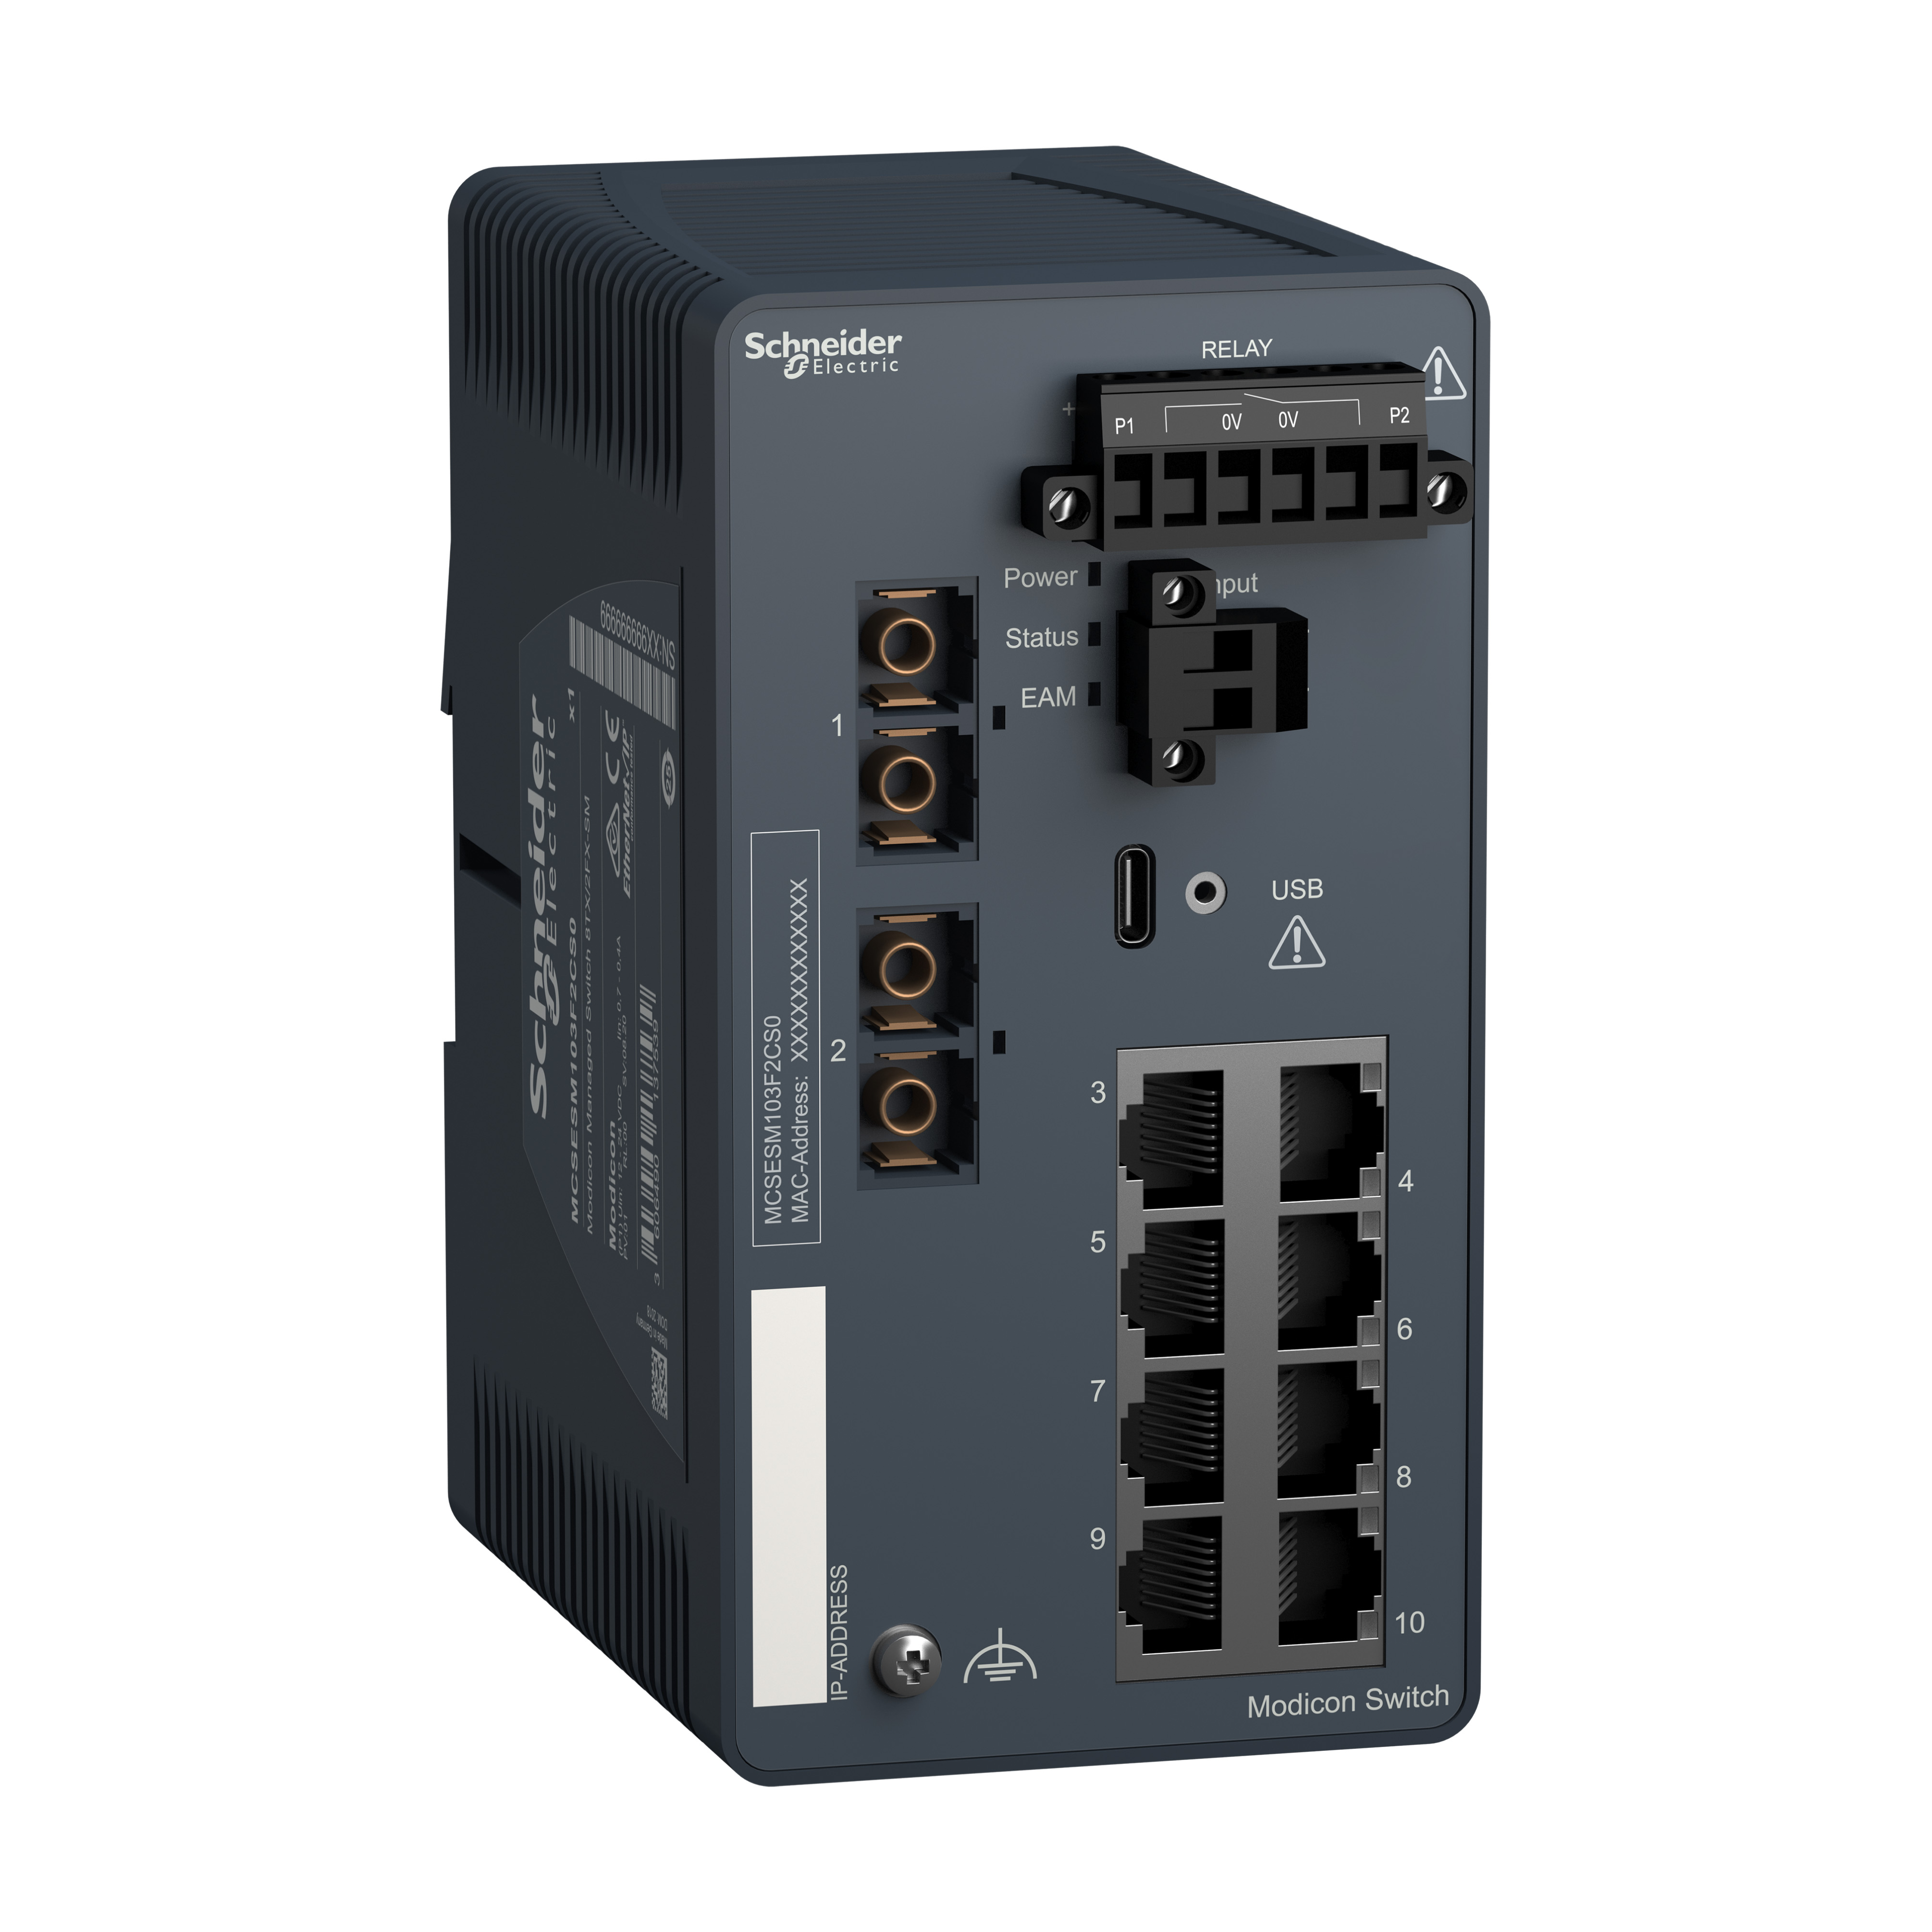 network switch, Modicon Networking, managed, 8 ports for copper with 2 ports for fiber optic, singlemode